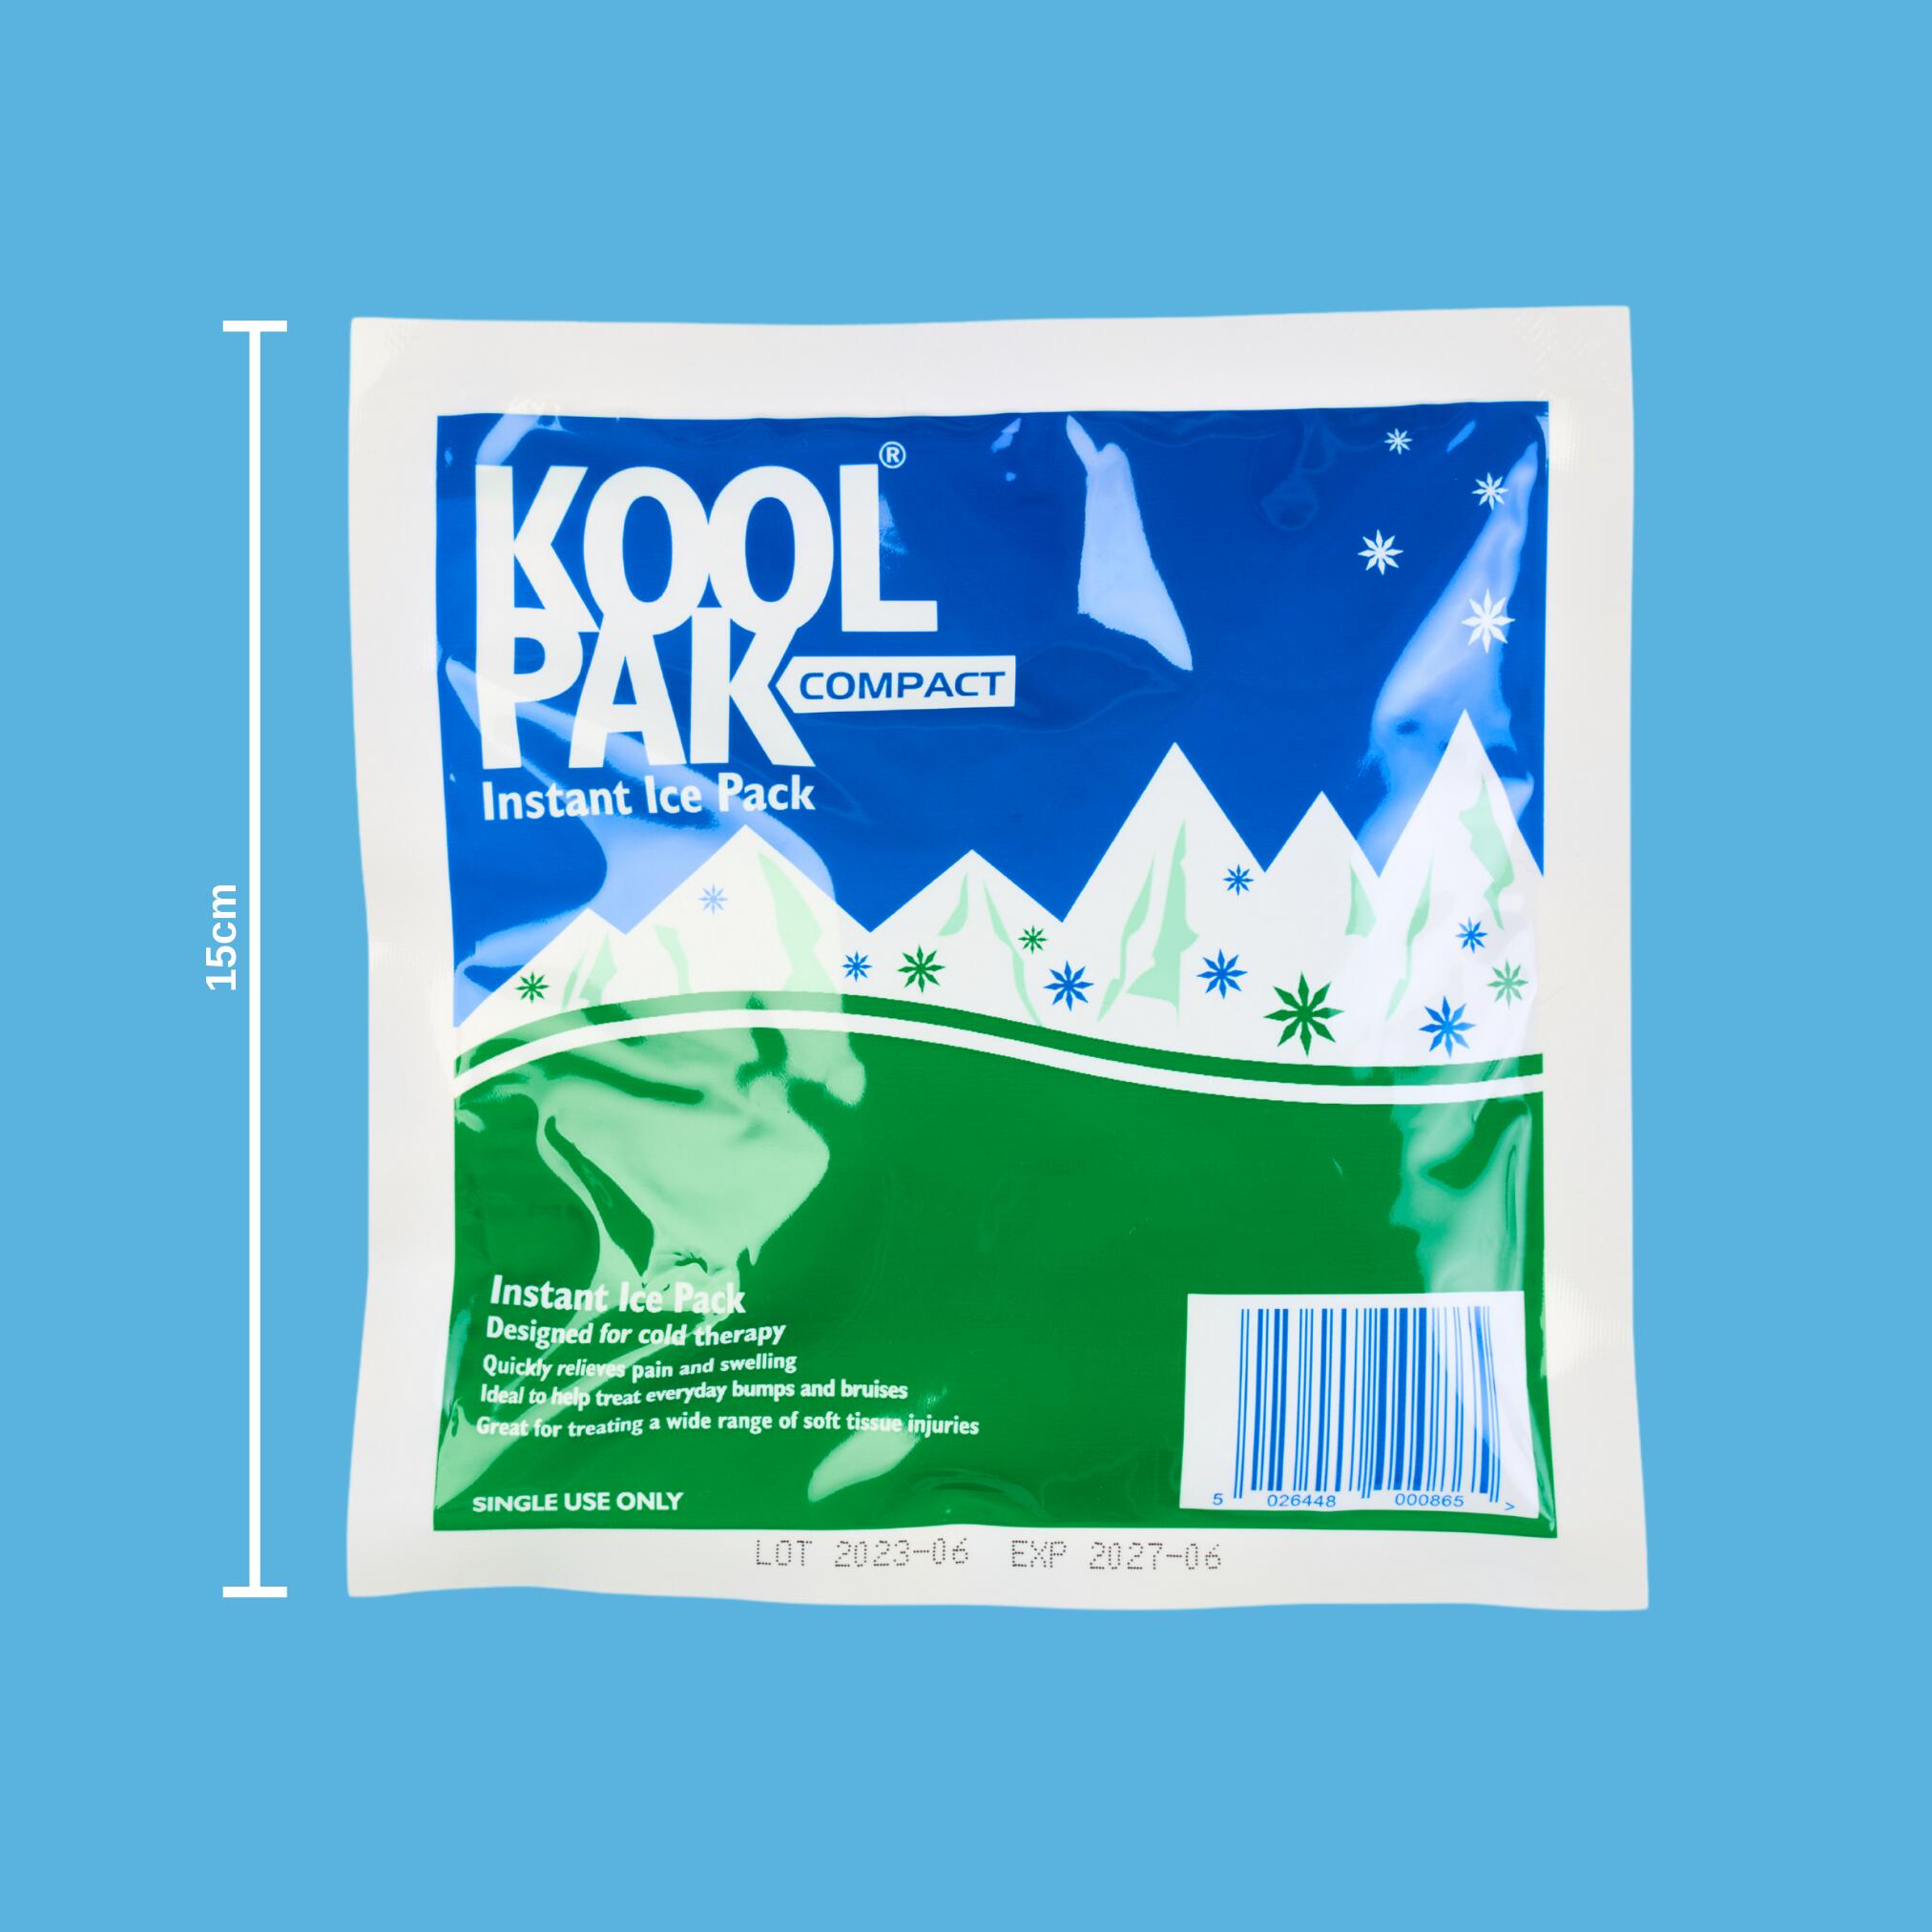 Koolpak Compact Instant Ice Pack - 15 x 15cm - Pack of 80 6/6